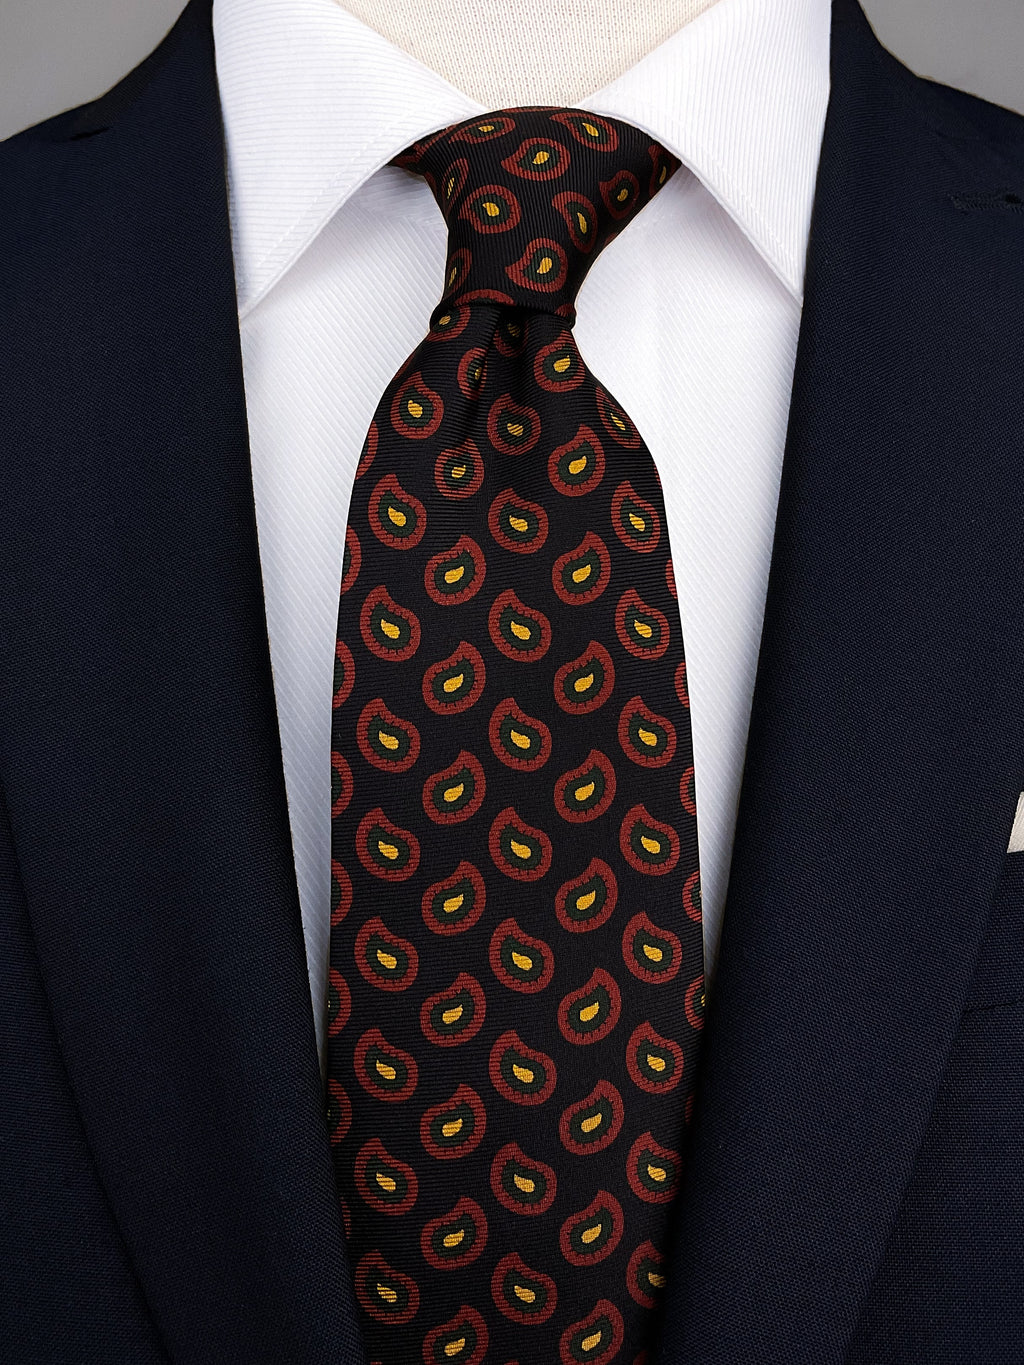 Paisley silk tie with a black base and red and yellow motifs. The tie is worn with a white shirt and a navy suit